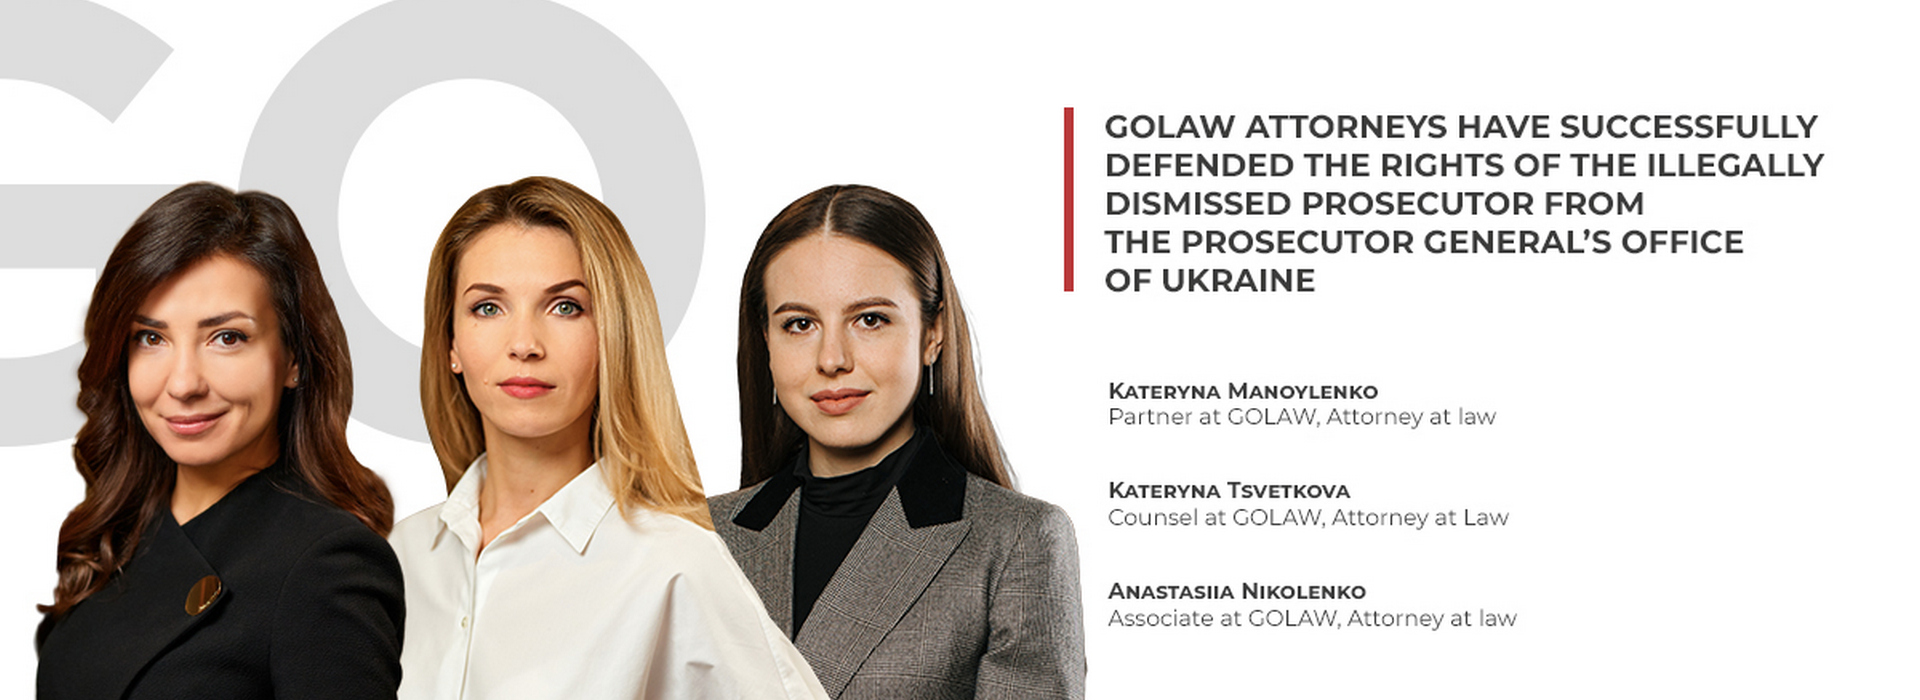 GOLAW Attorneys Have Successfully Defended the Rights of the Illegally Dismissed Prosecutor from the Prosecutor General’s Office of Ukraine